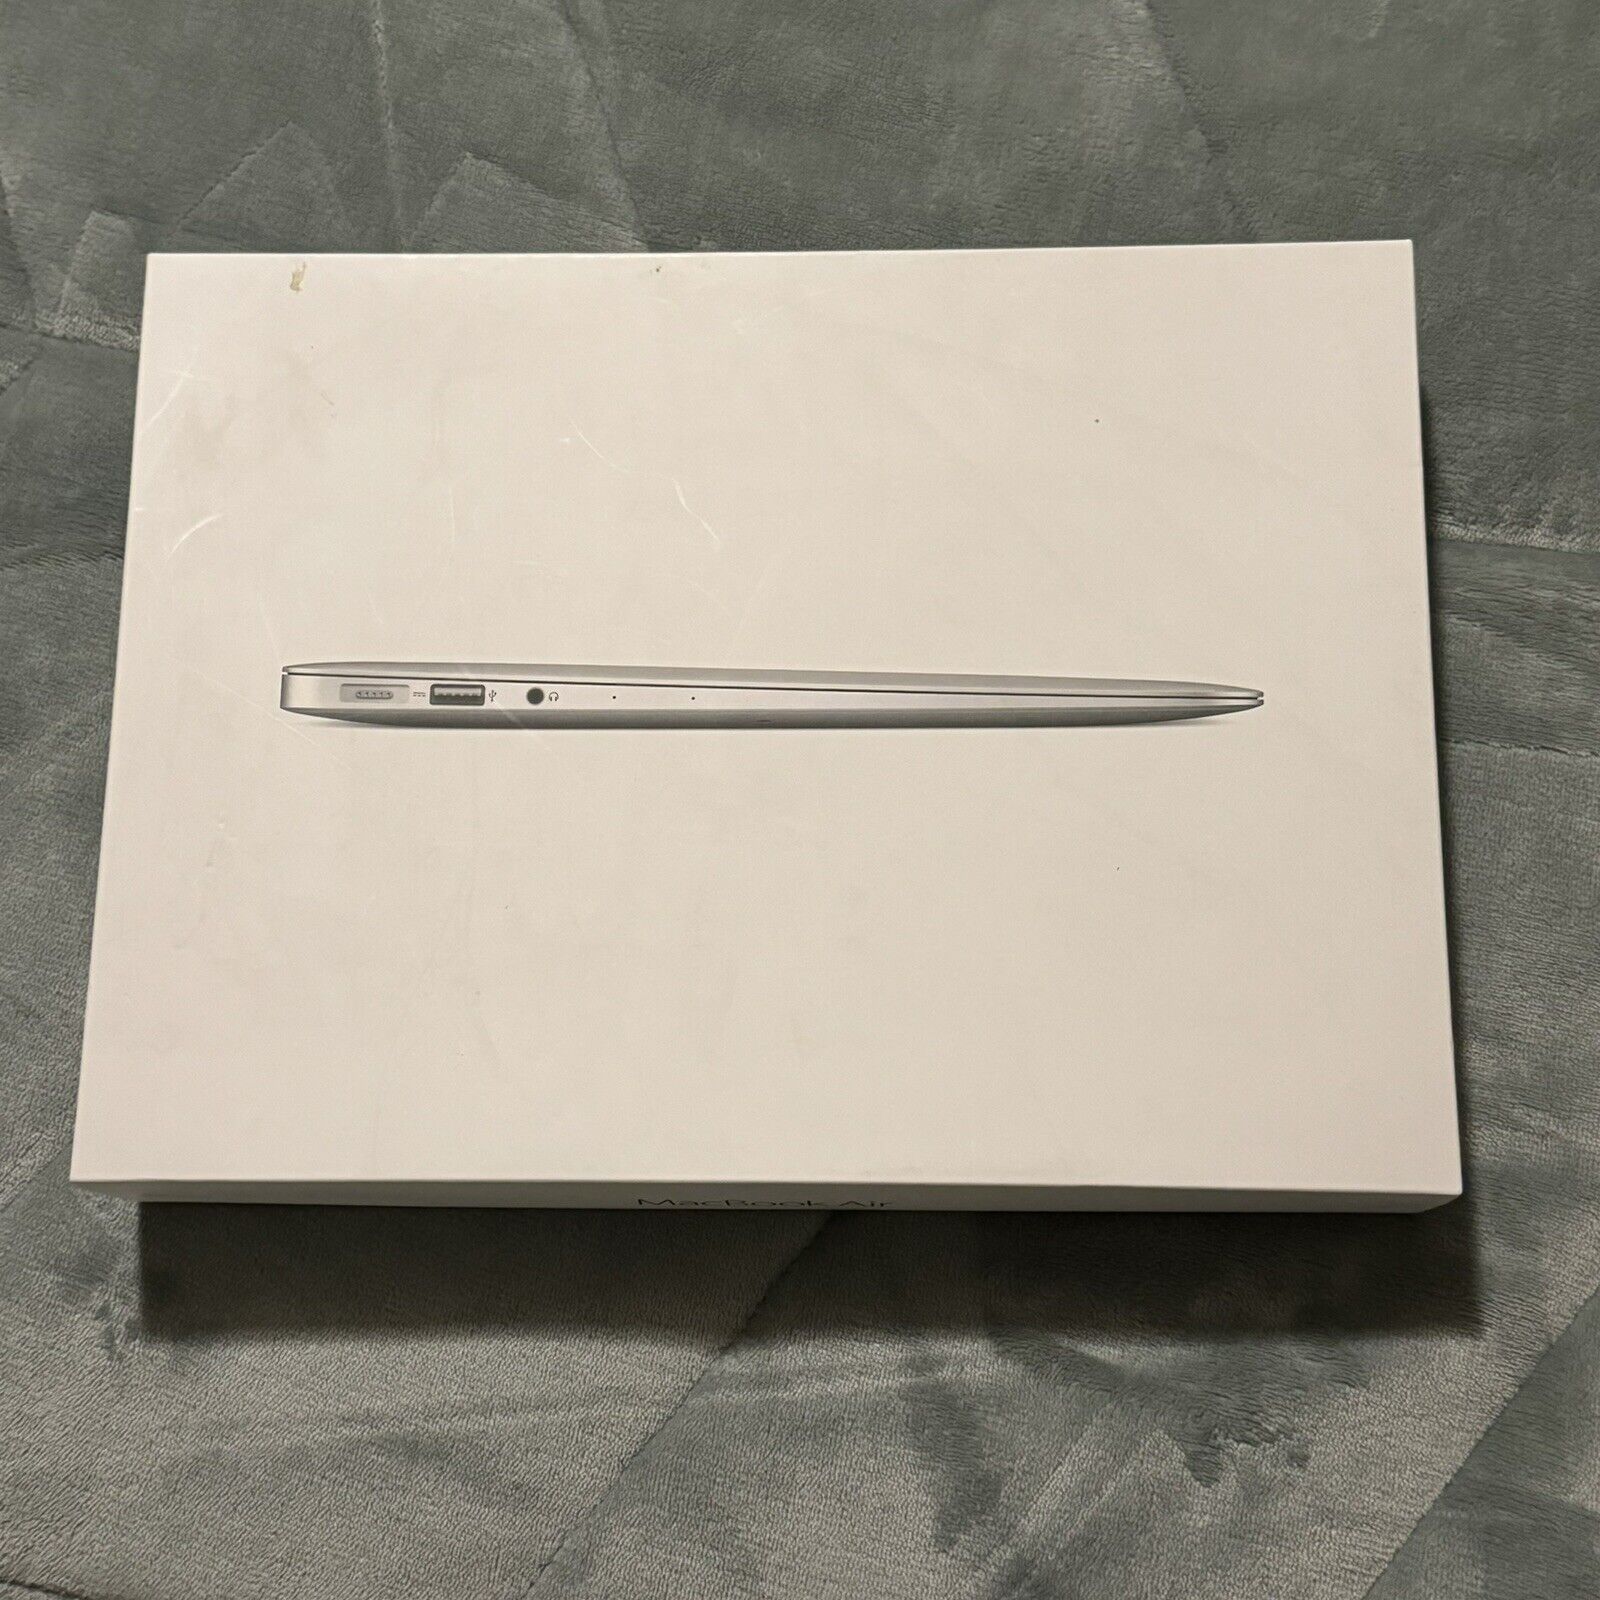 **EMPTY BOX ONLY** Original Box for Apple MacBook Air 13 inch Model A1466